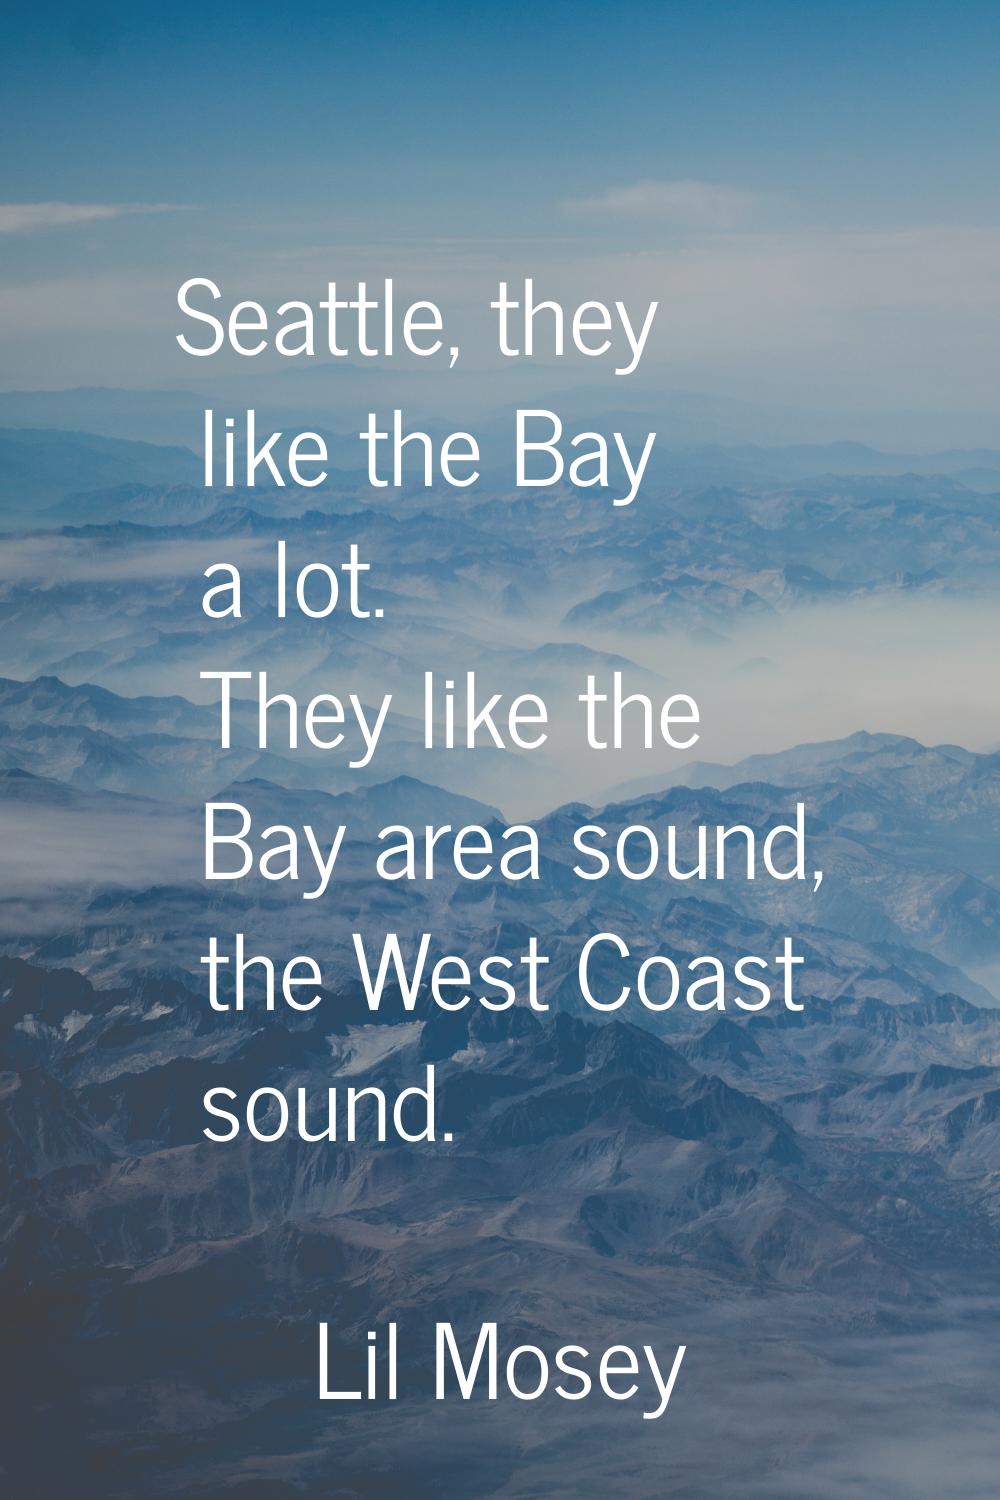 Seattle, they like the Bay a lot. They like the Bay area sound, the West Coast sound.